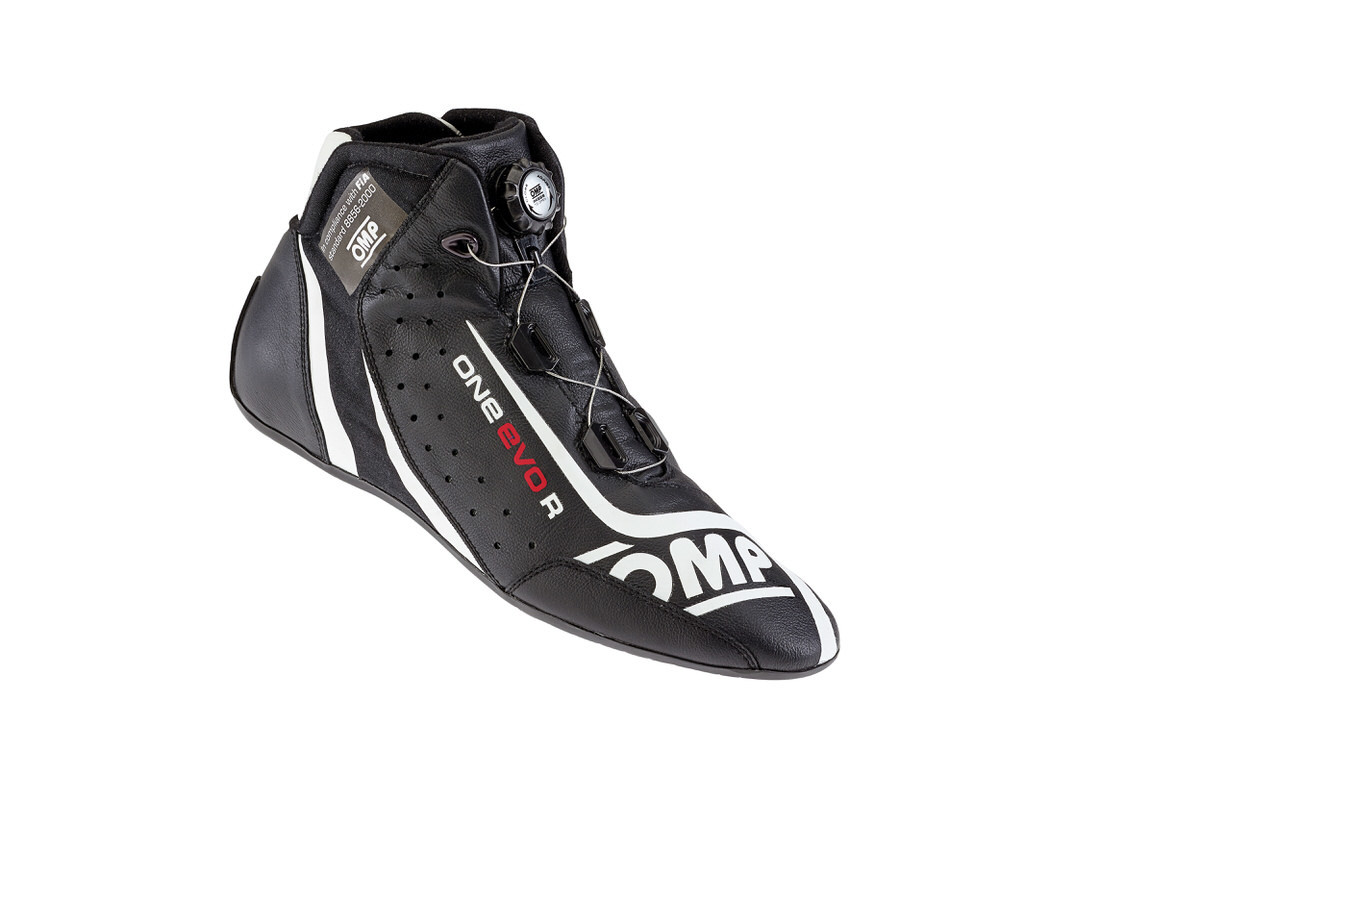 OMP Racing IC80507142 - Shoe, One Evo R, Driving, Mid-Top, FIA Approved, Leather Outer, Fire Retardant Fabric Inner, Black, Euro Size 42, Pair